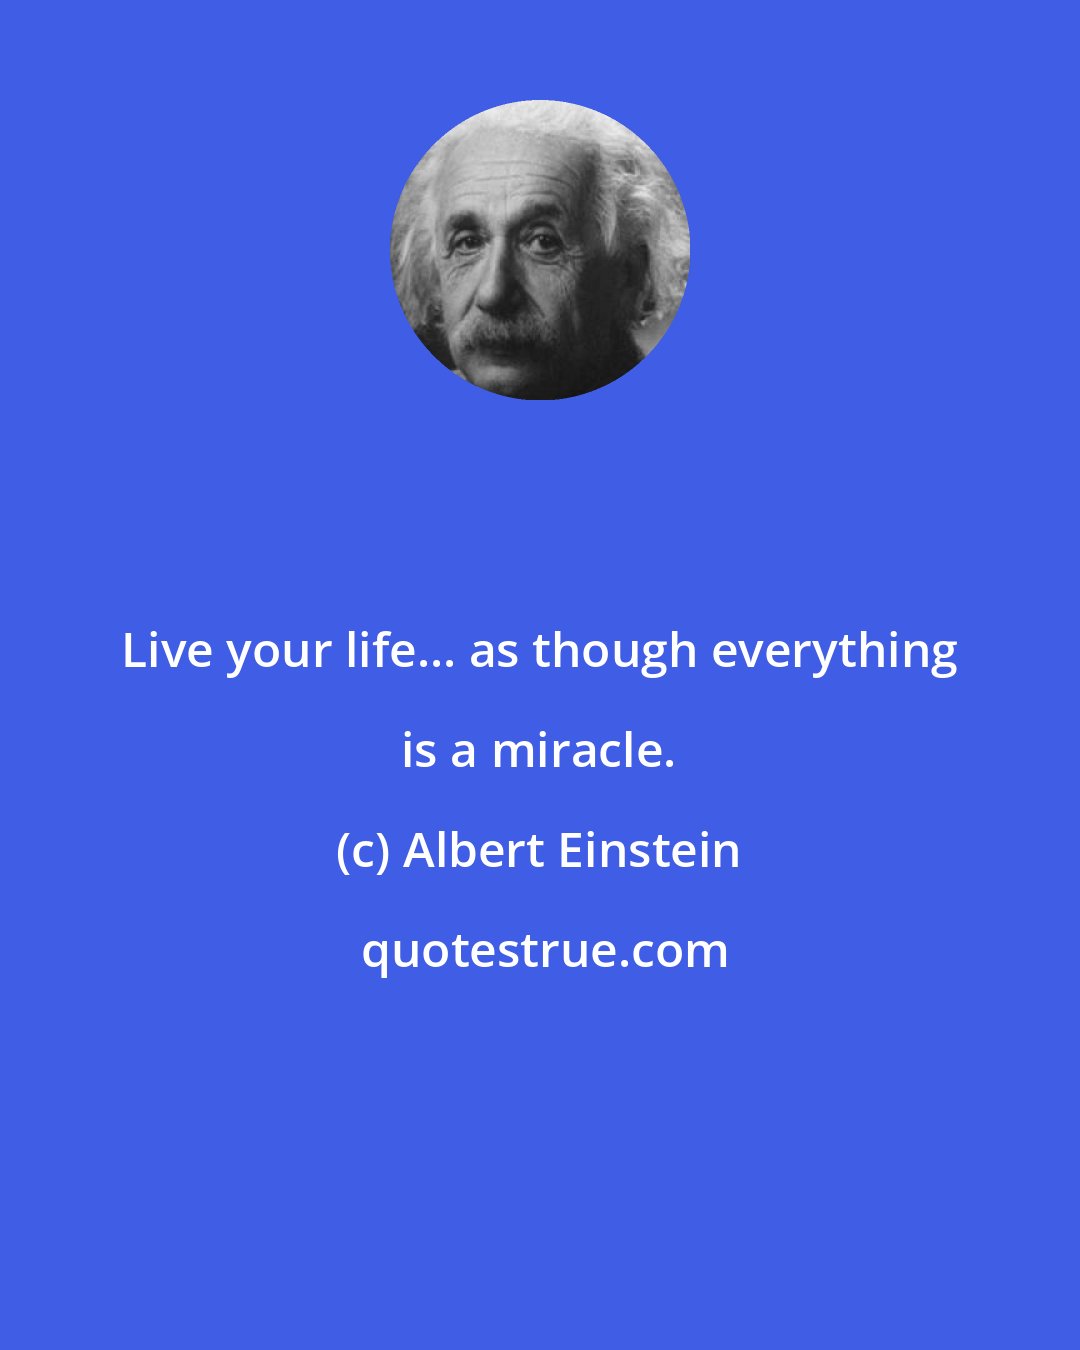 Albert Einstein: Live your life... as though everything is a miracle.